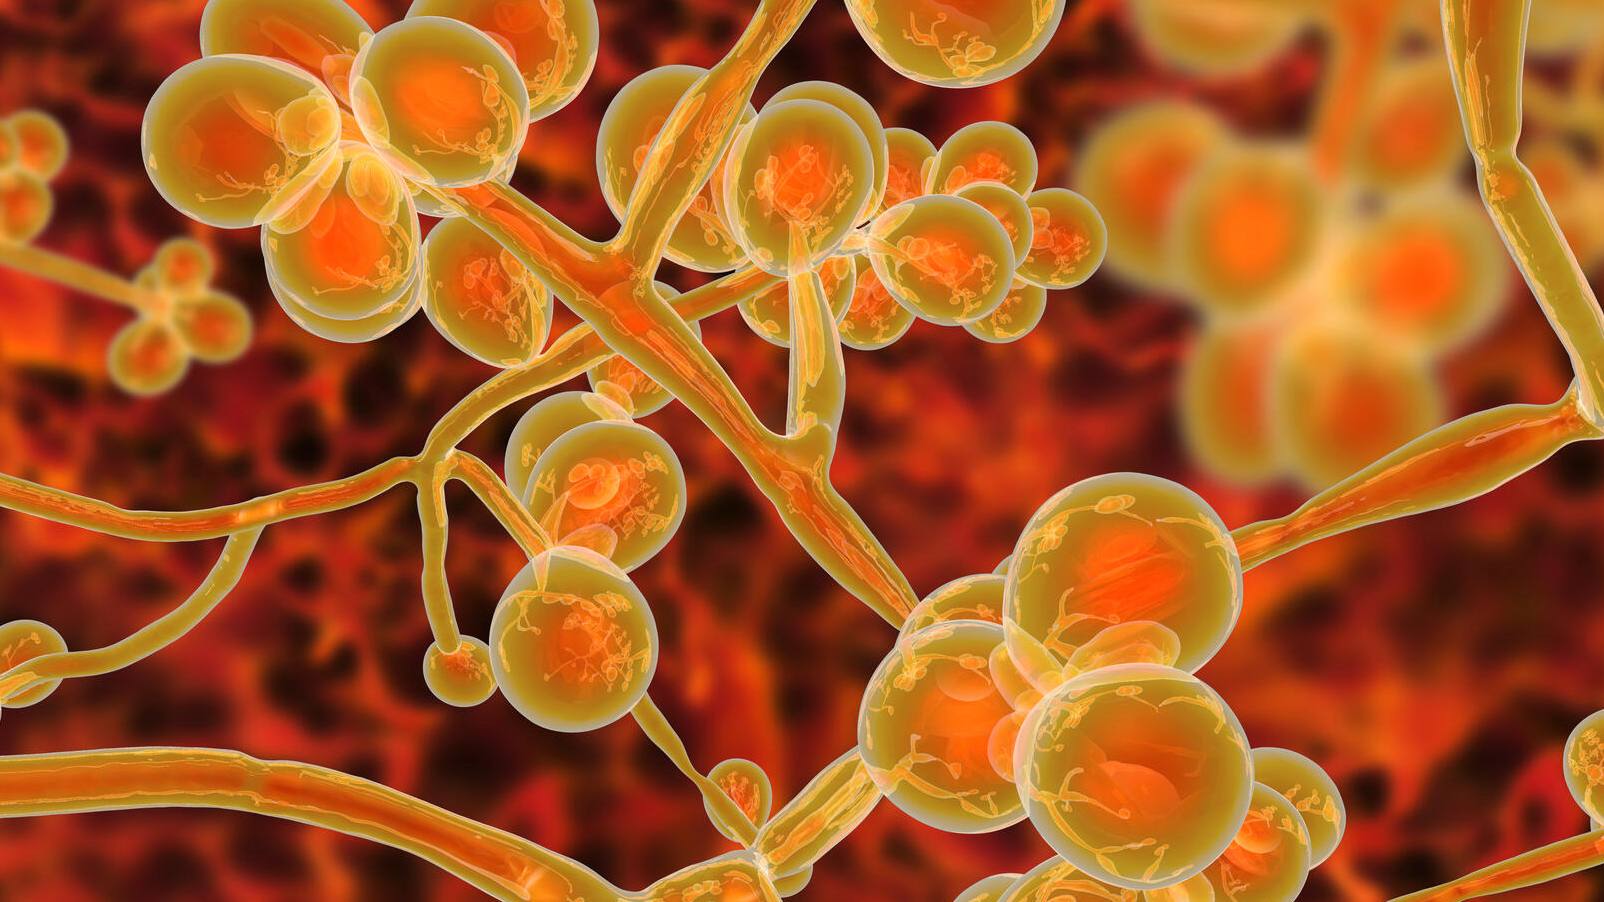 Candida auris This fungus is a health care concern Mayo Clinic News